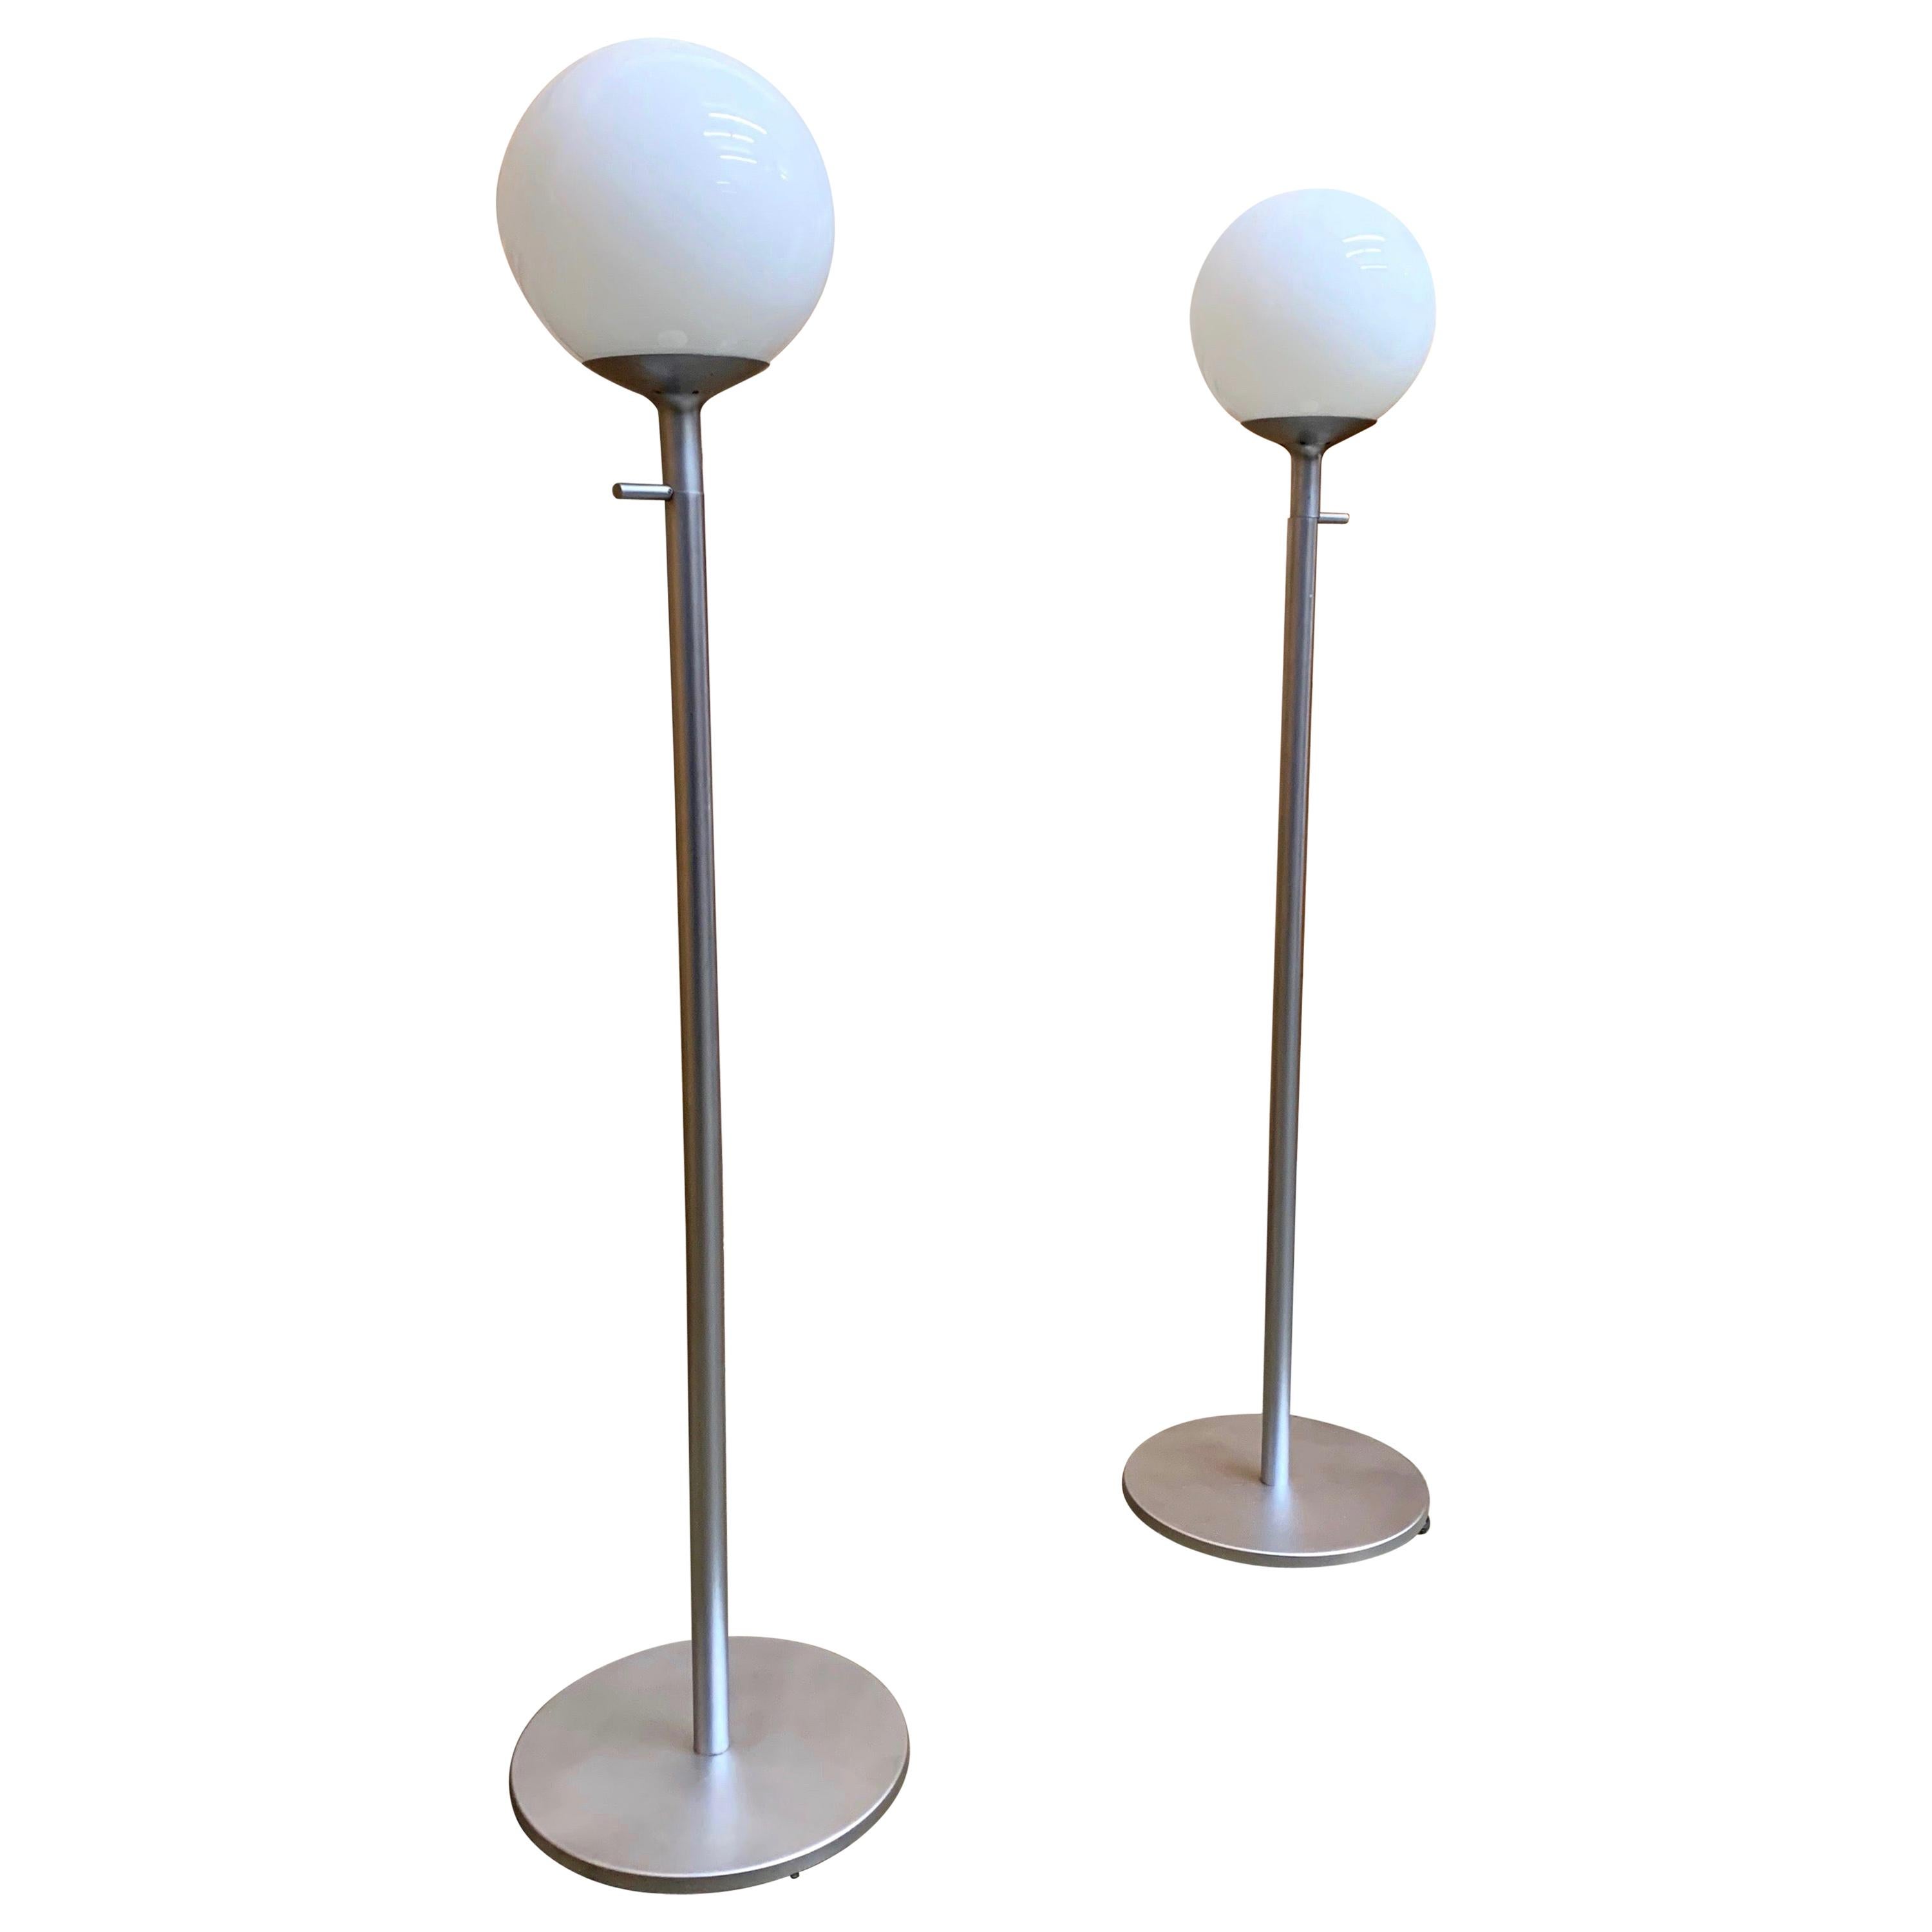 Vintage Globe Floor Lamps by ClassiCon